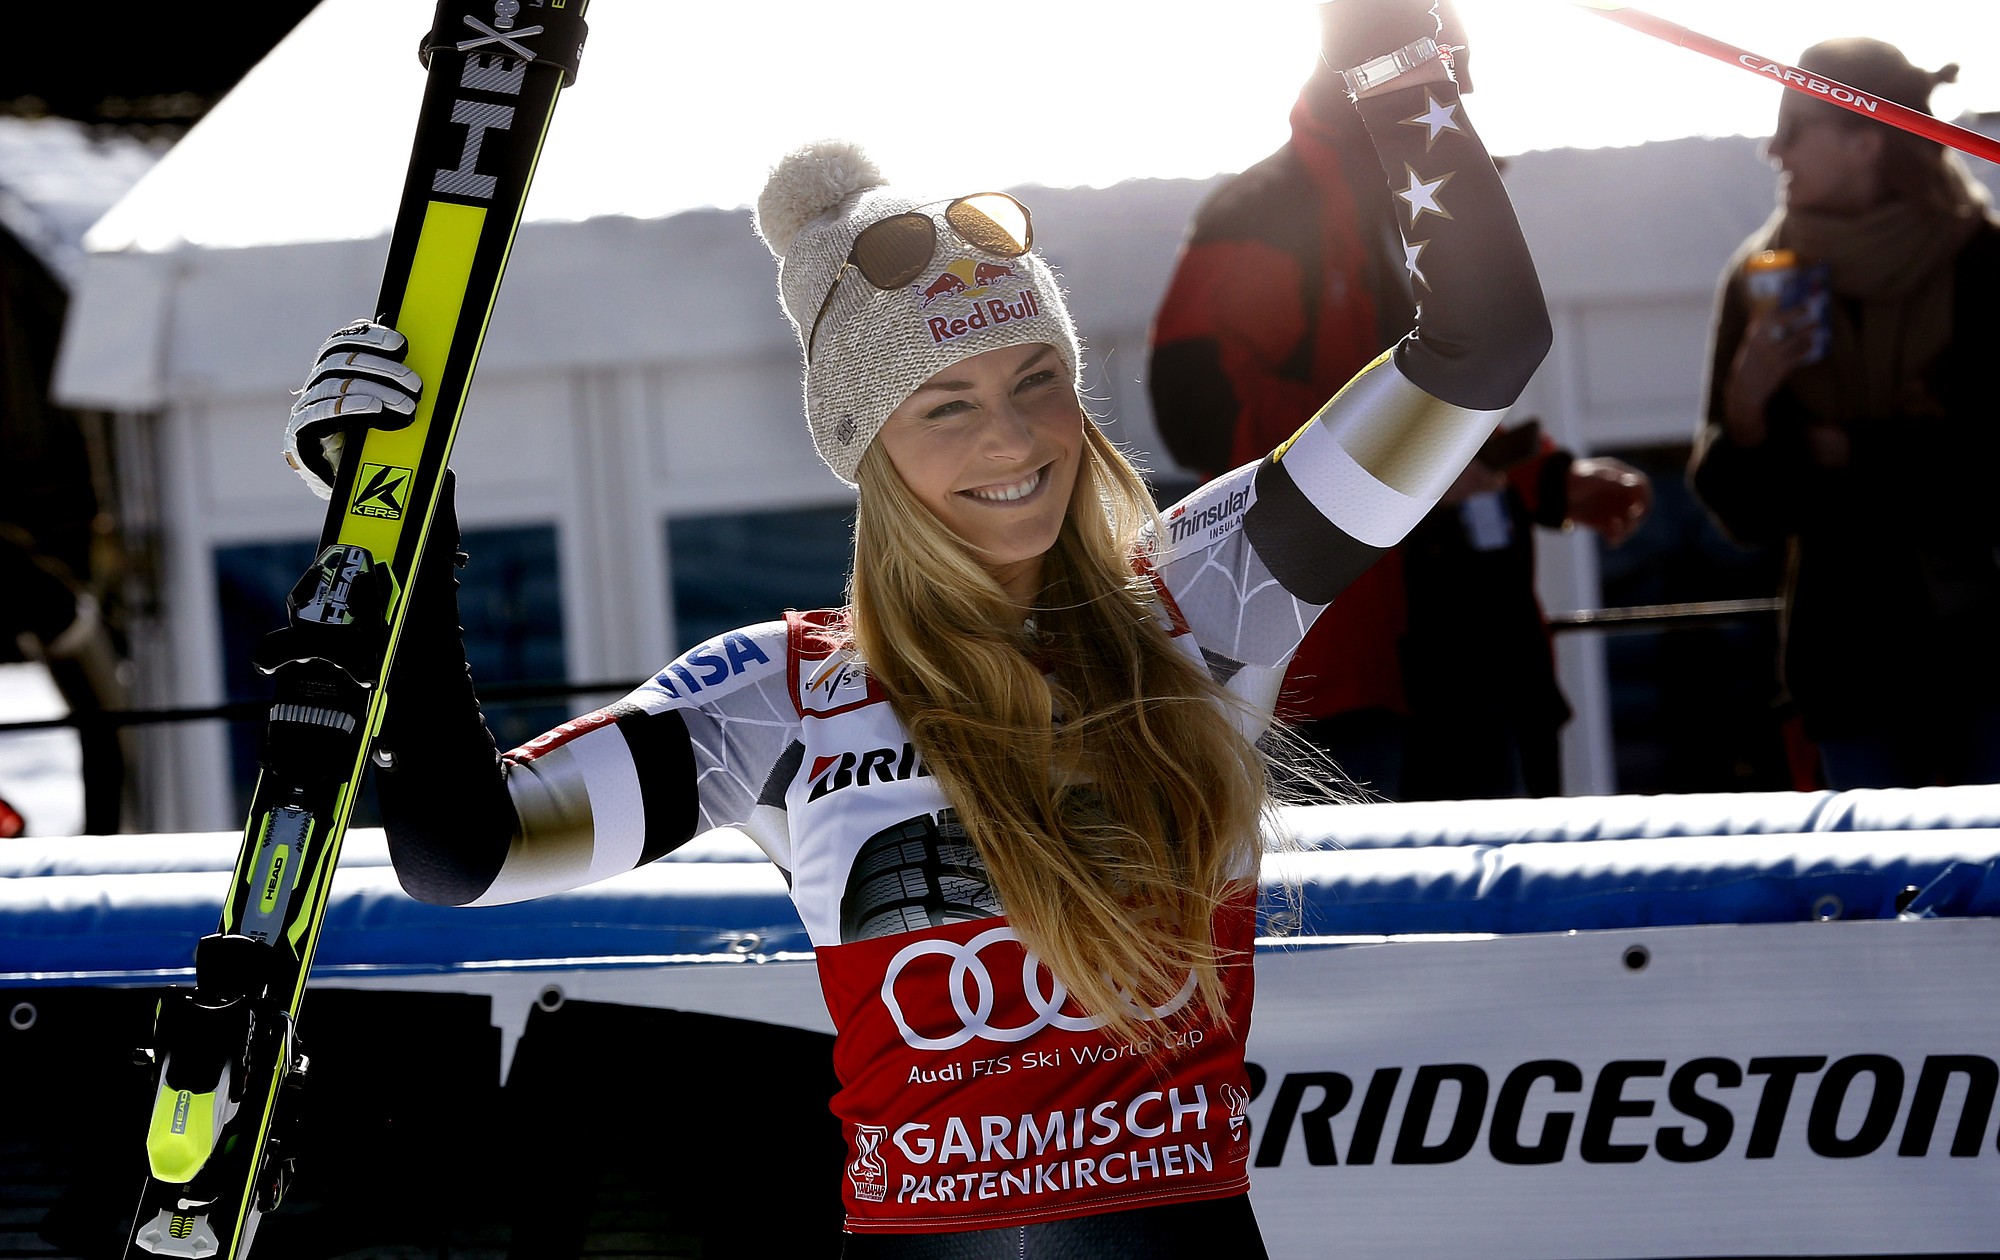 Lindsey Vonn, of the United States, celebrates in the finish area after winning a women's World Cup super-G, in Garmisch-Partenkirchen, Germany, on Sunday, March 8, 2015.